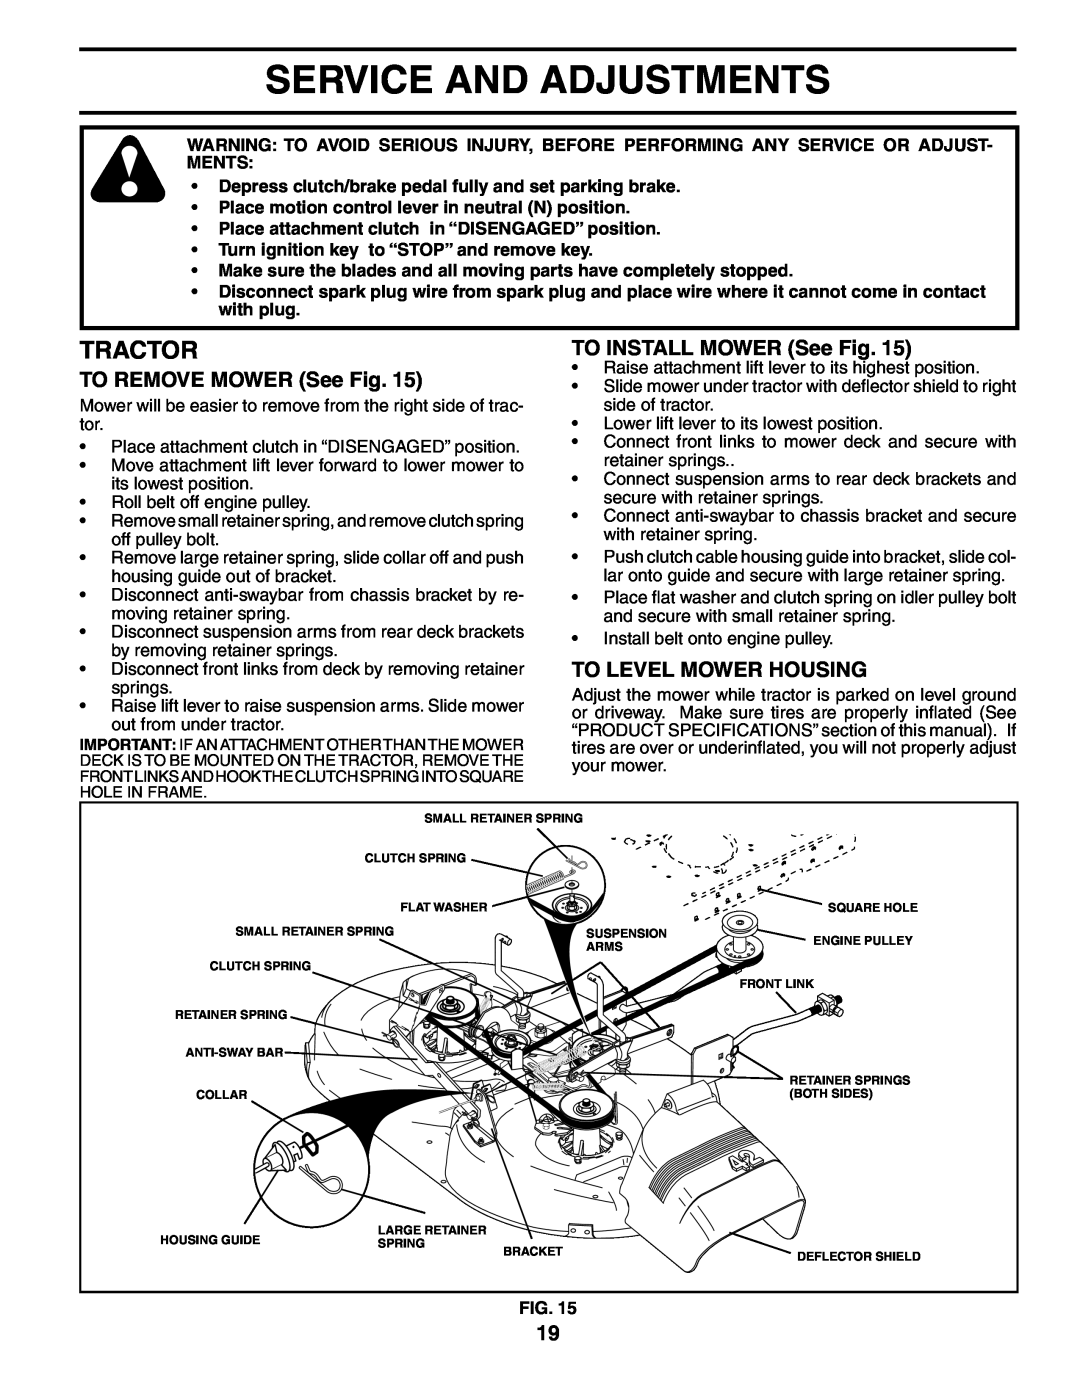 Poulan PK19H42LT manual Service And Adjustments, TO REMOVE MOWER See Fig, TO INSTALL MOWER See Fig, To Level Mower Housing 